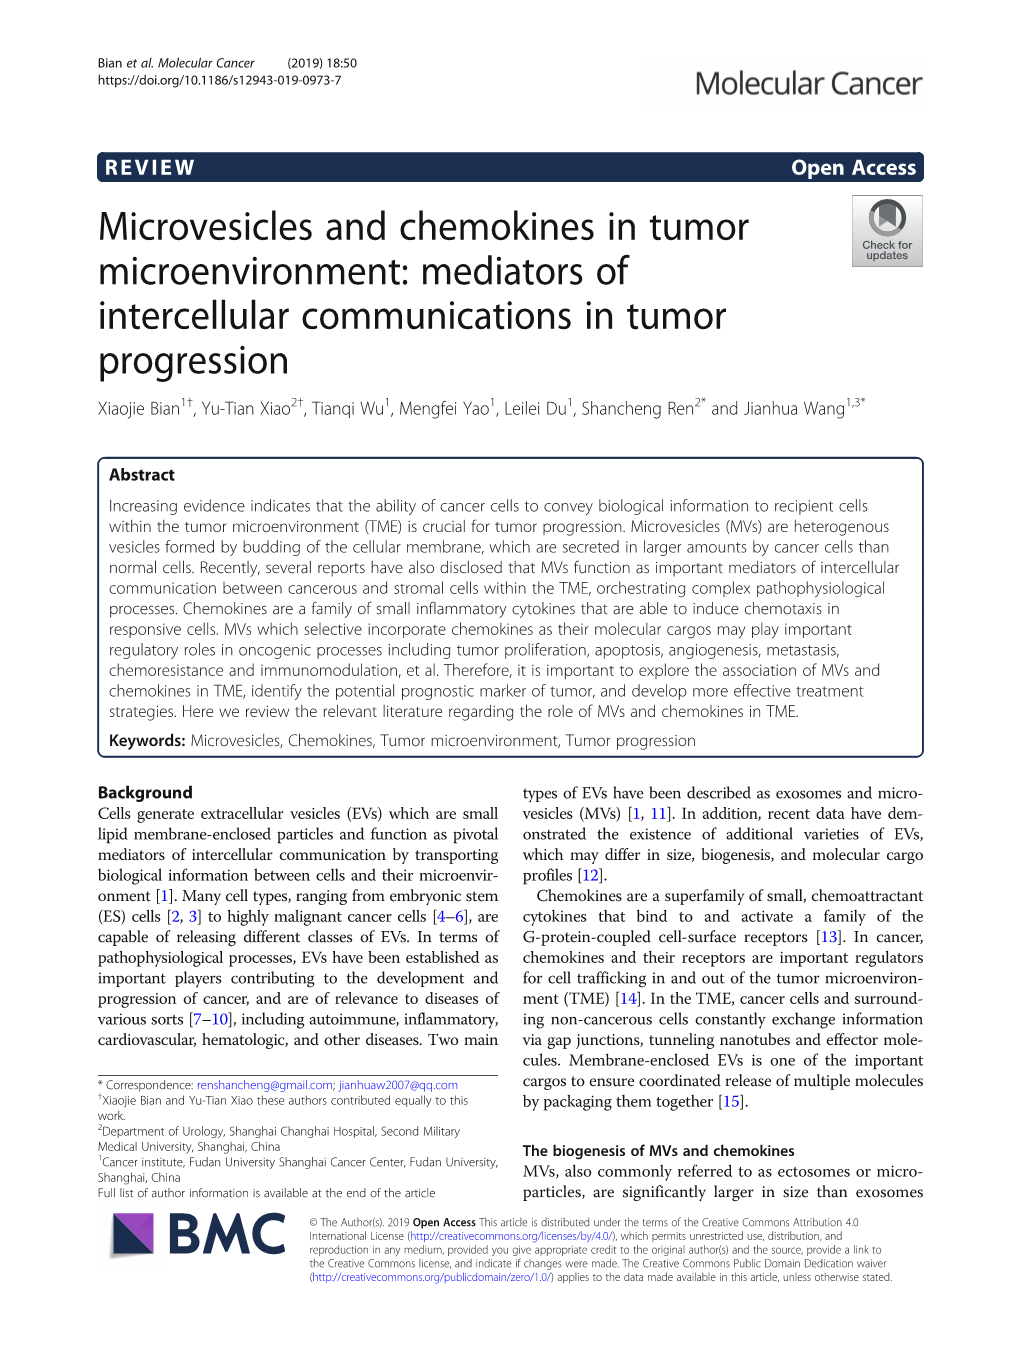 Microvesicles and Chemokines in Tumor Microenvironment